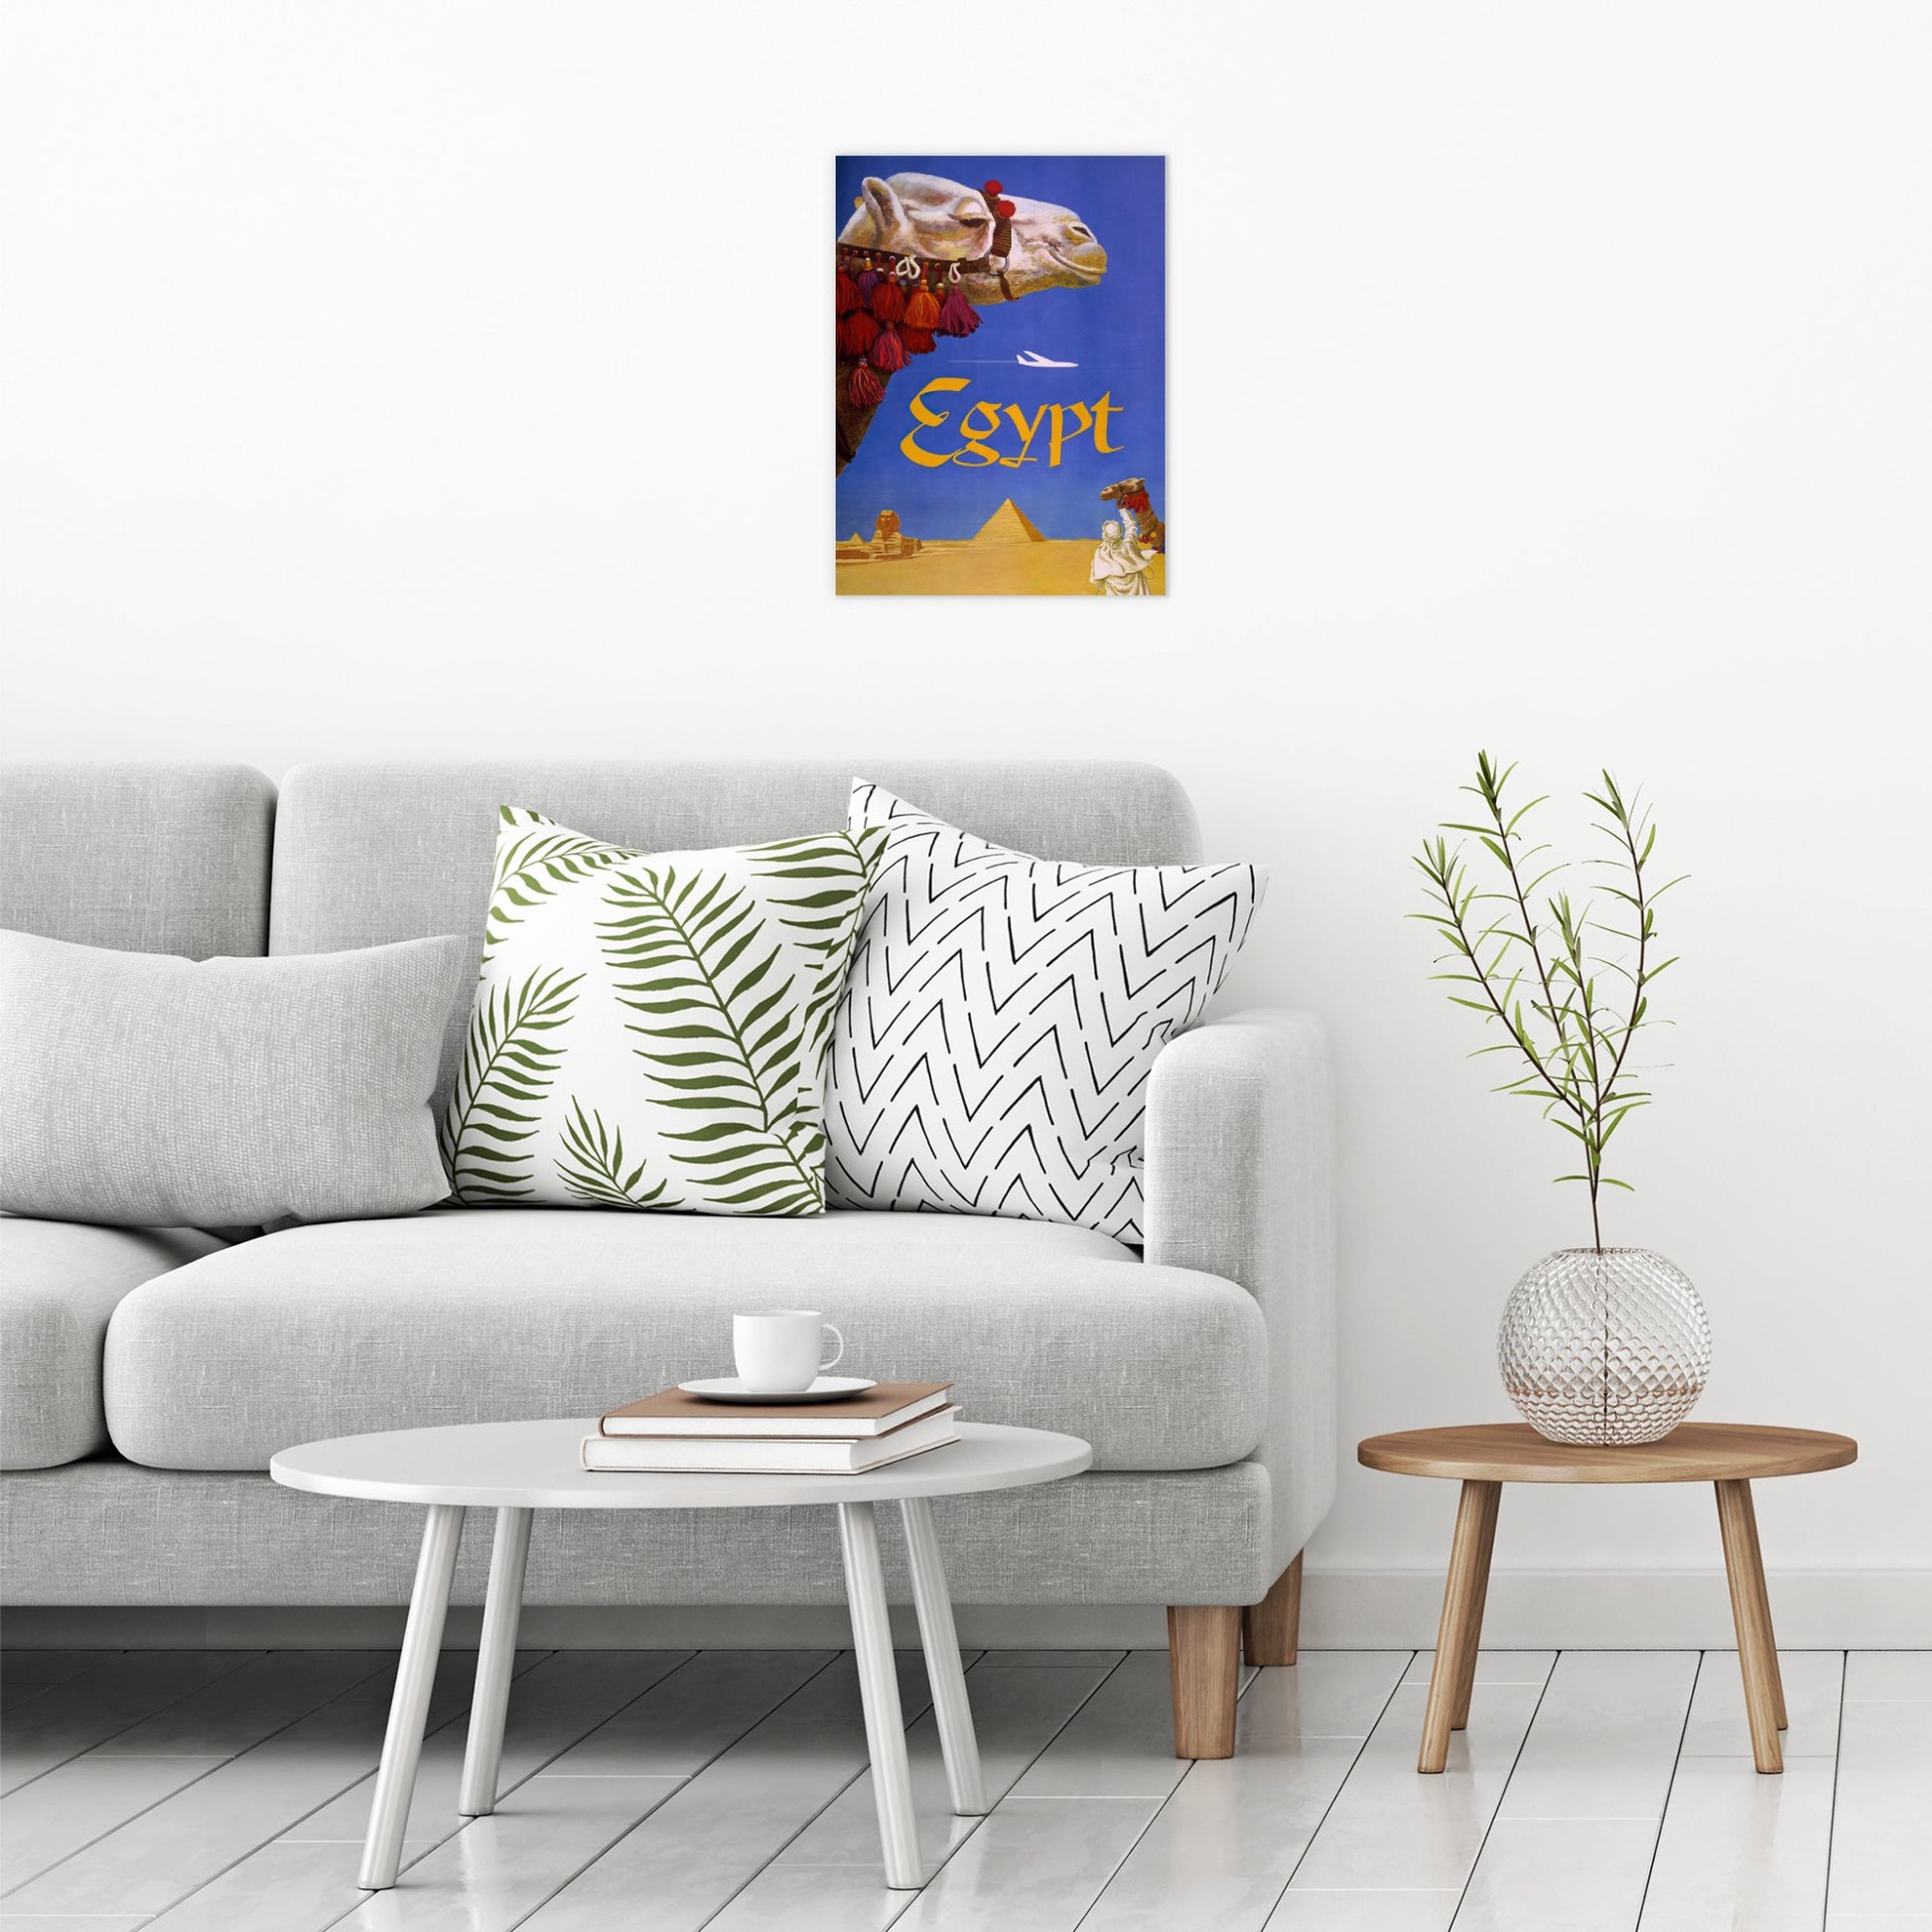 A contemporary modern room view showing a medium size metal art poster display plate with printed design of a Egypt Fly TWA (1960) vintage poster by David Klein